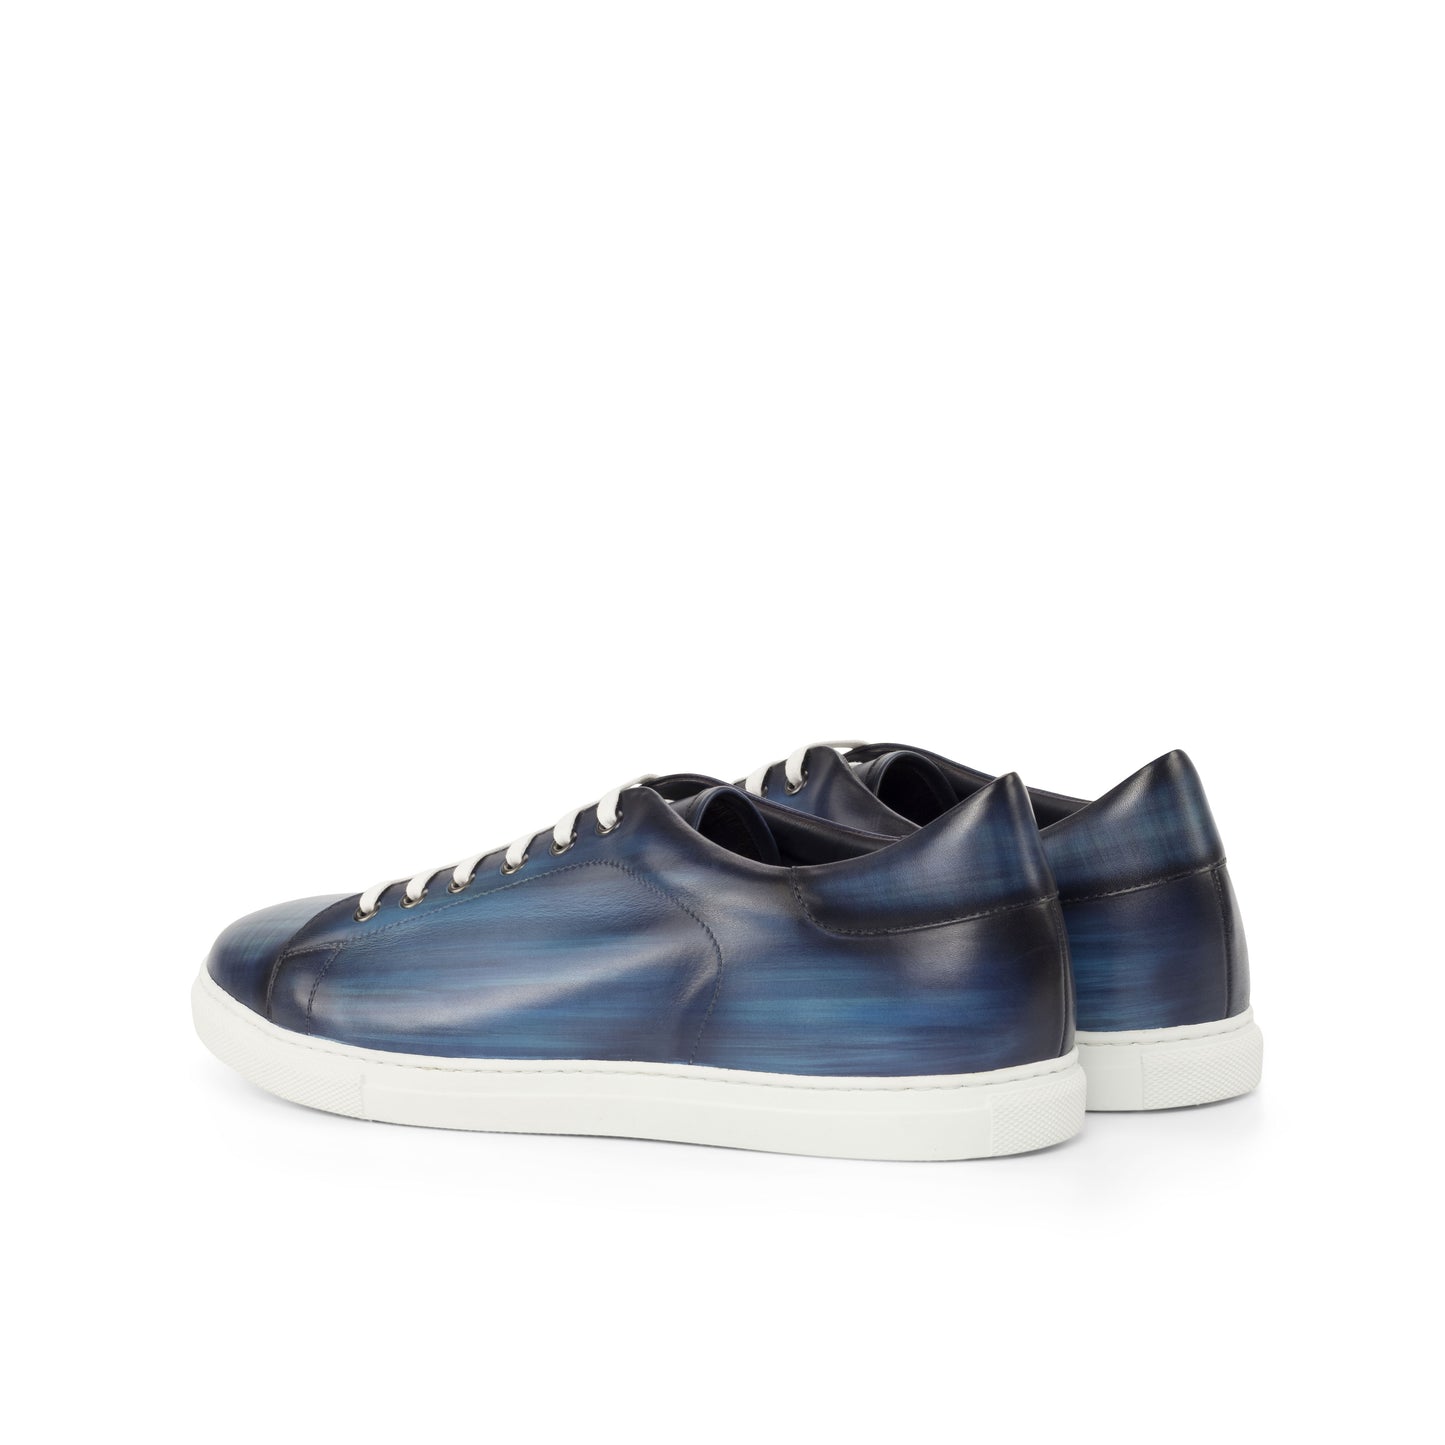 Sneakers blue jeans classic patina leather